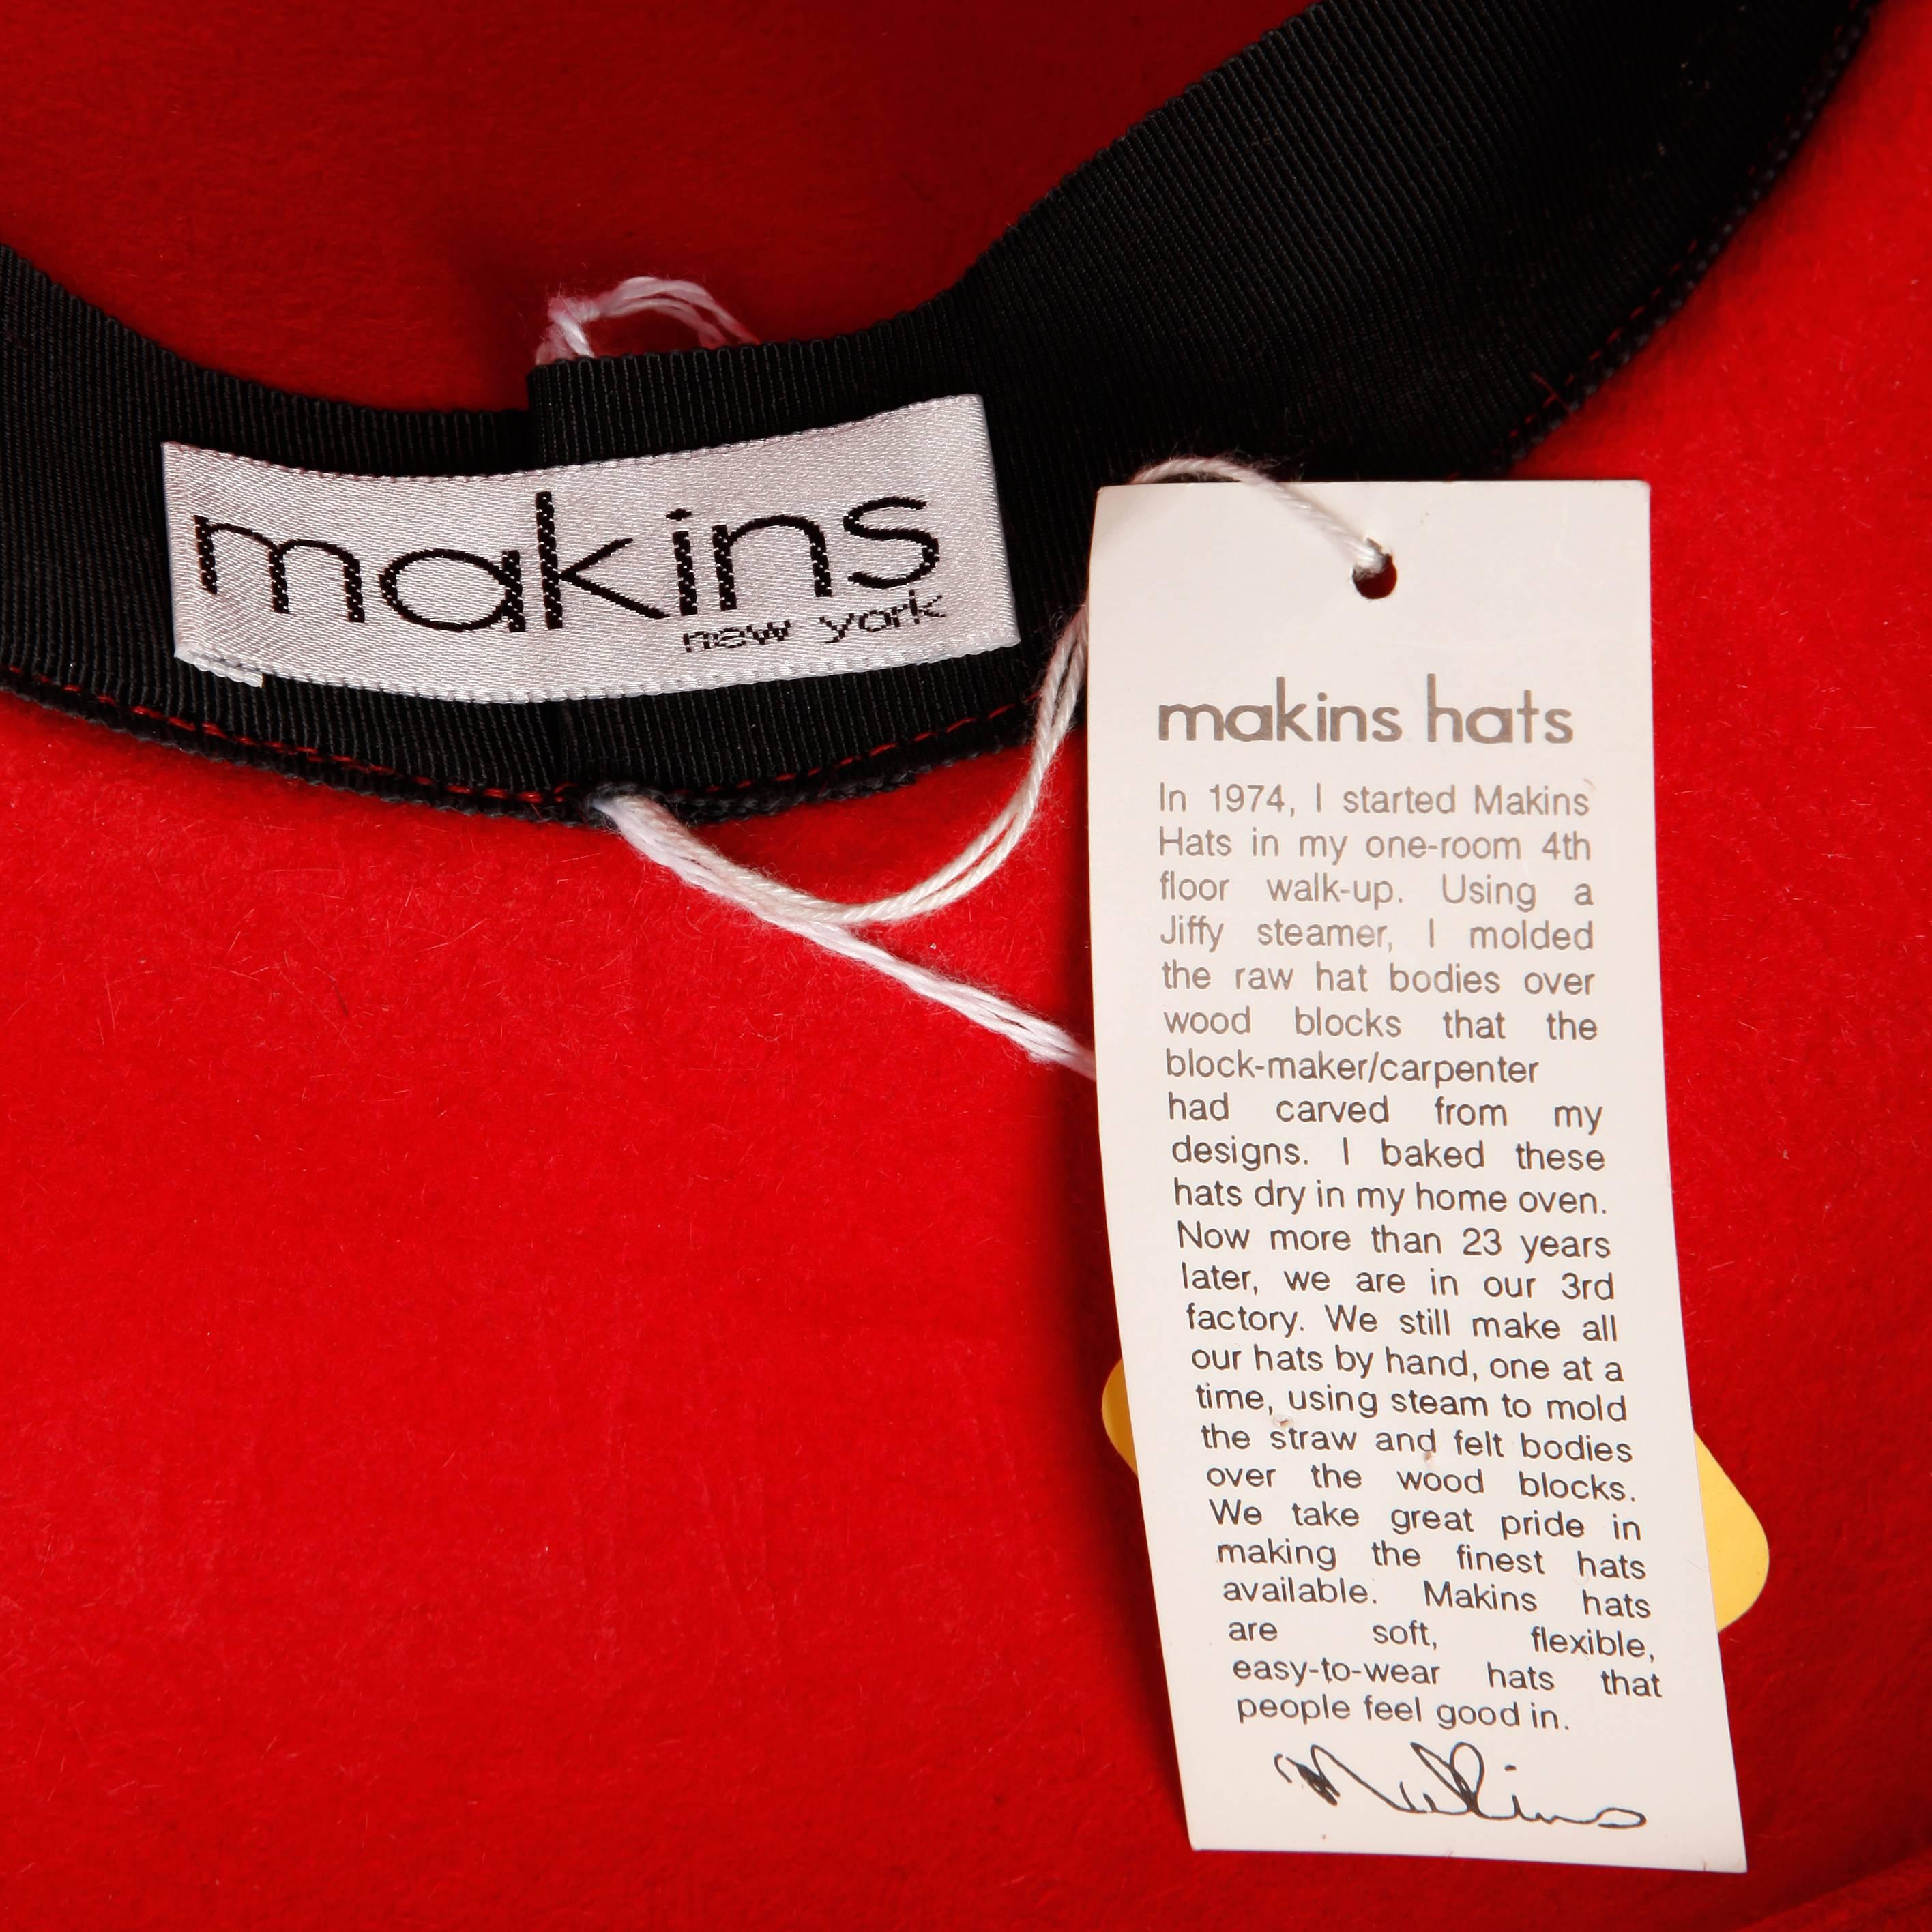 Unworn with the original tags still attached! This is a deadstock piece that came from the stock of an old hat store located in Southern California. We have access to the entire inventory of over 3000 unworn hats.Made by Makins in New York. Bright